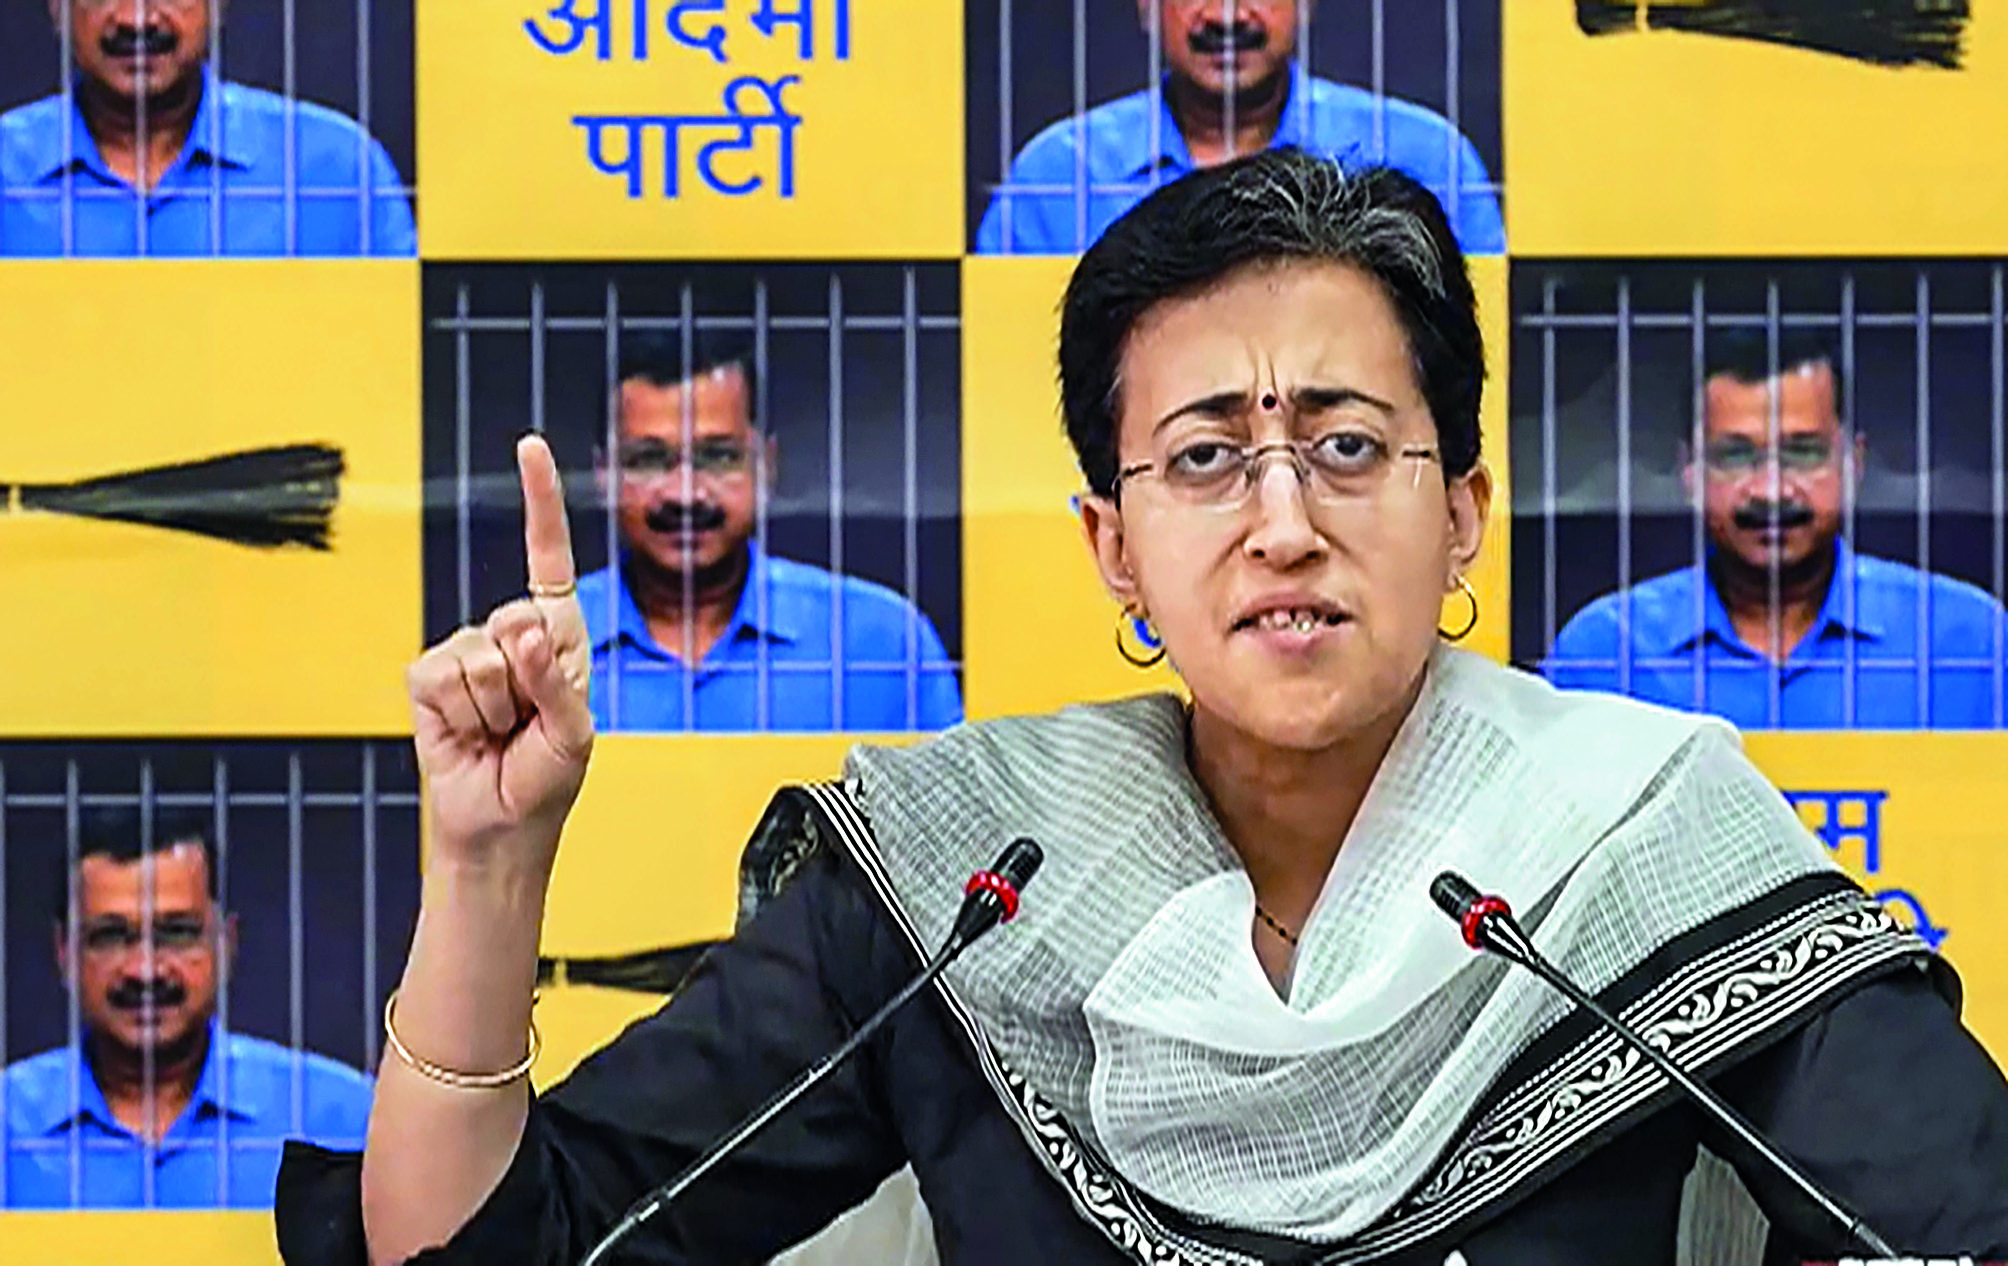 People will vote to end BJP’s ‘dictatorship and atrocities’, says Atishi